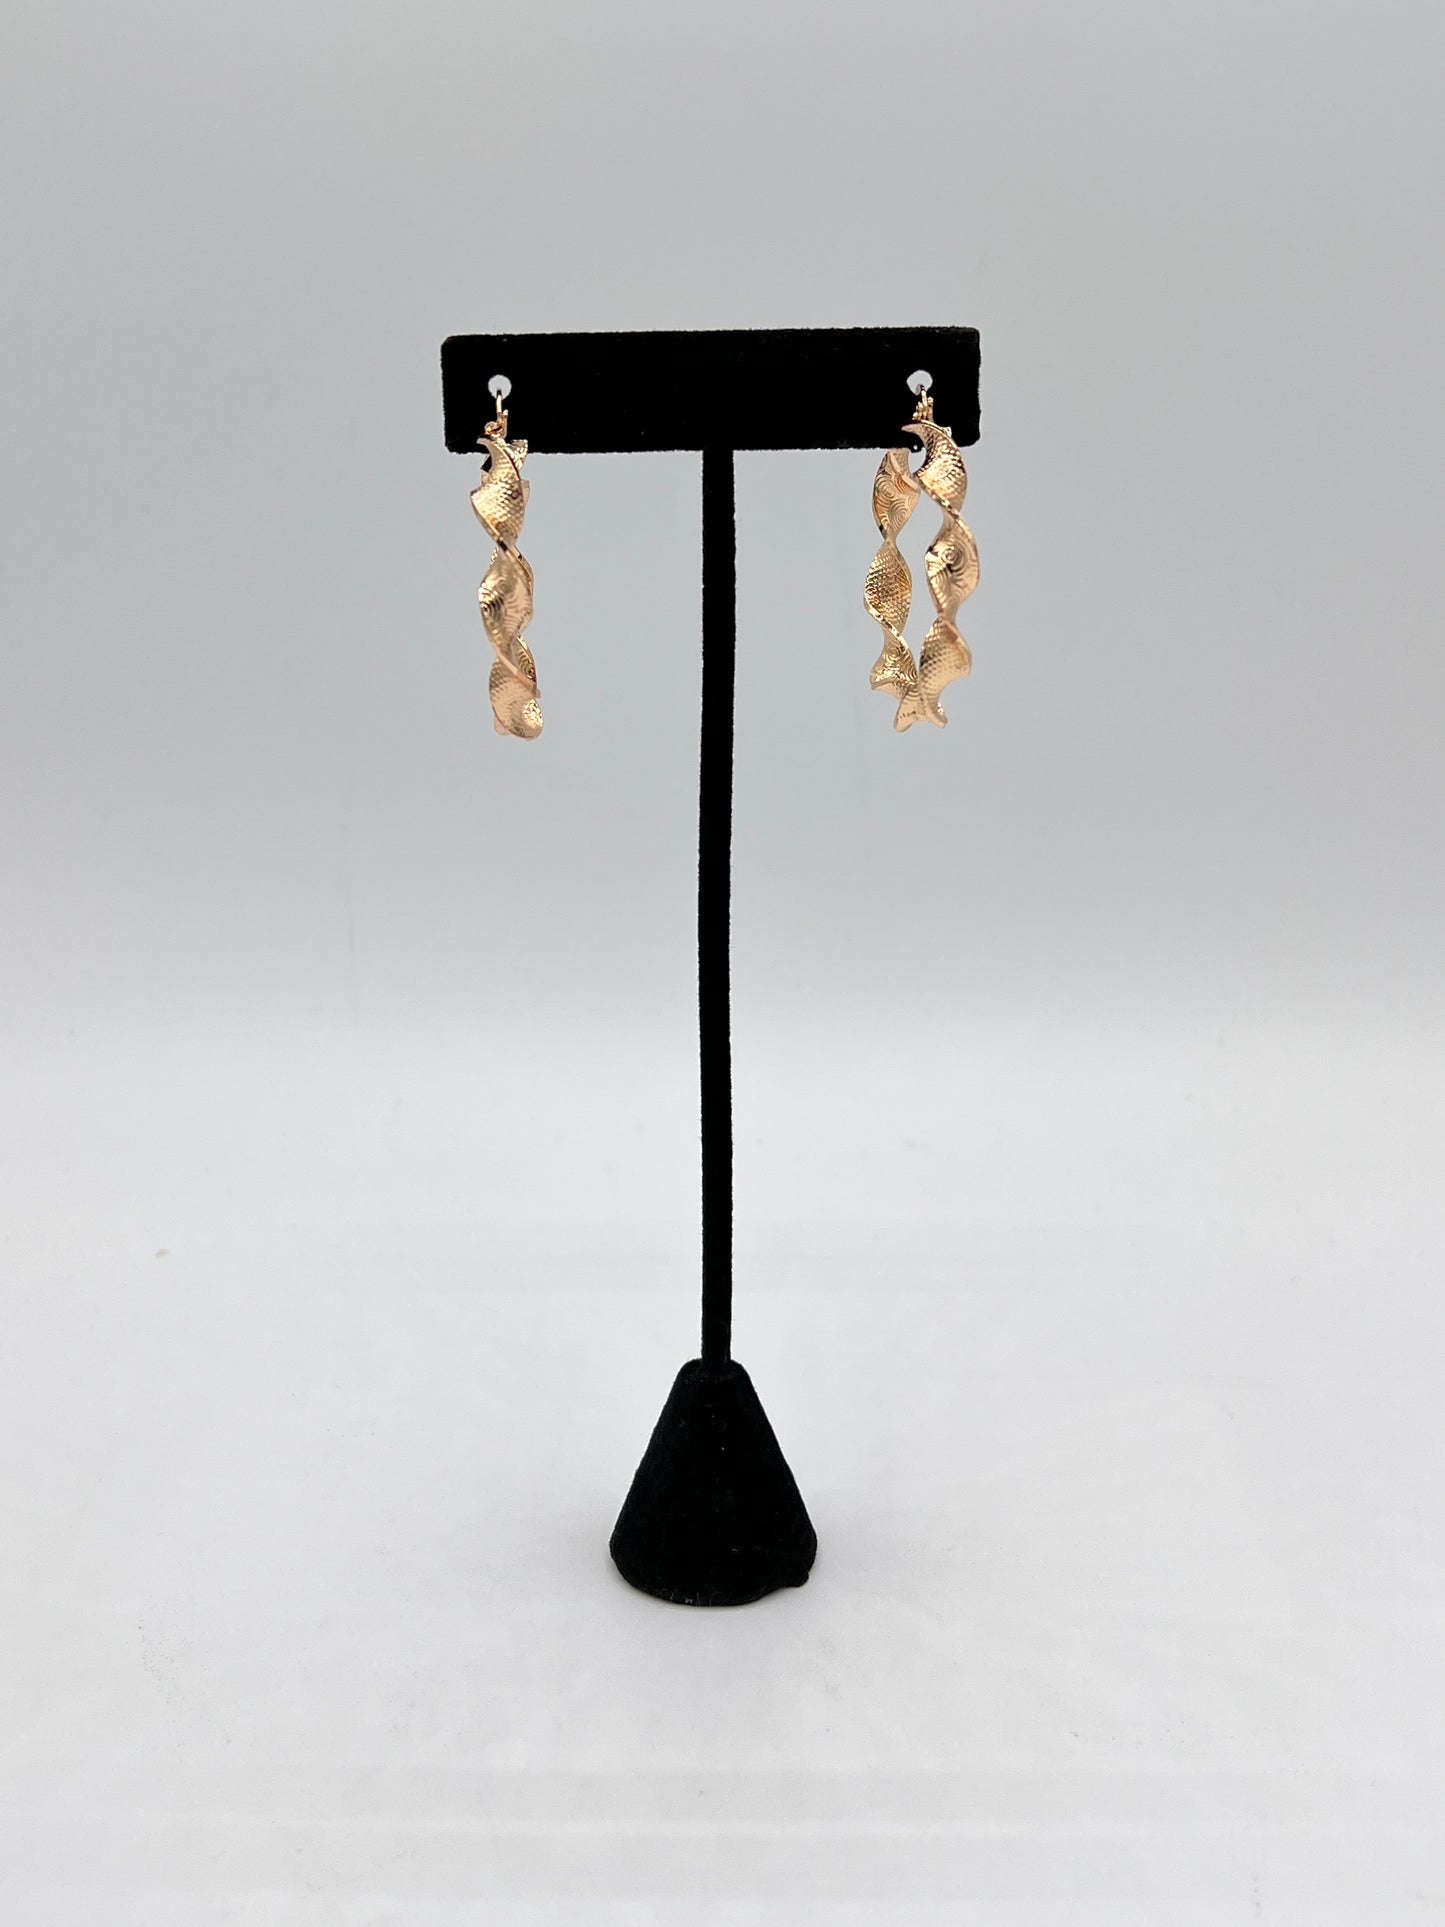 Twisted Gold Plated Hoops One Pair Free With Order $100 Or More